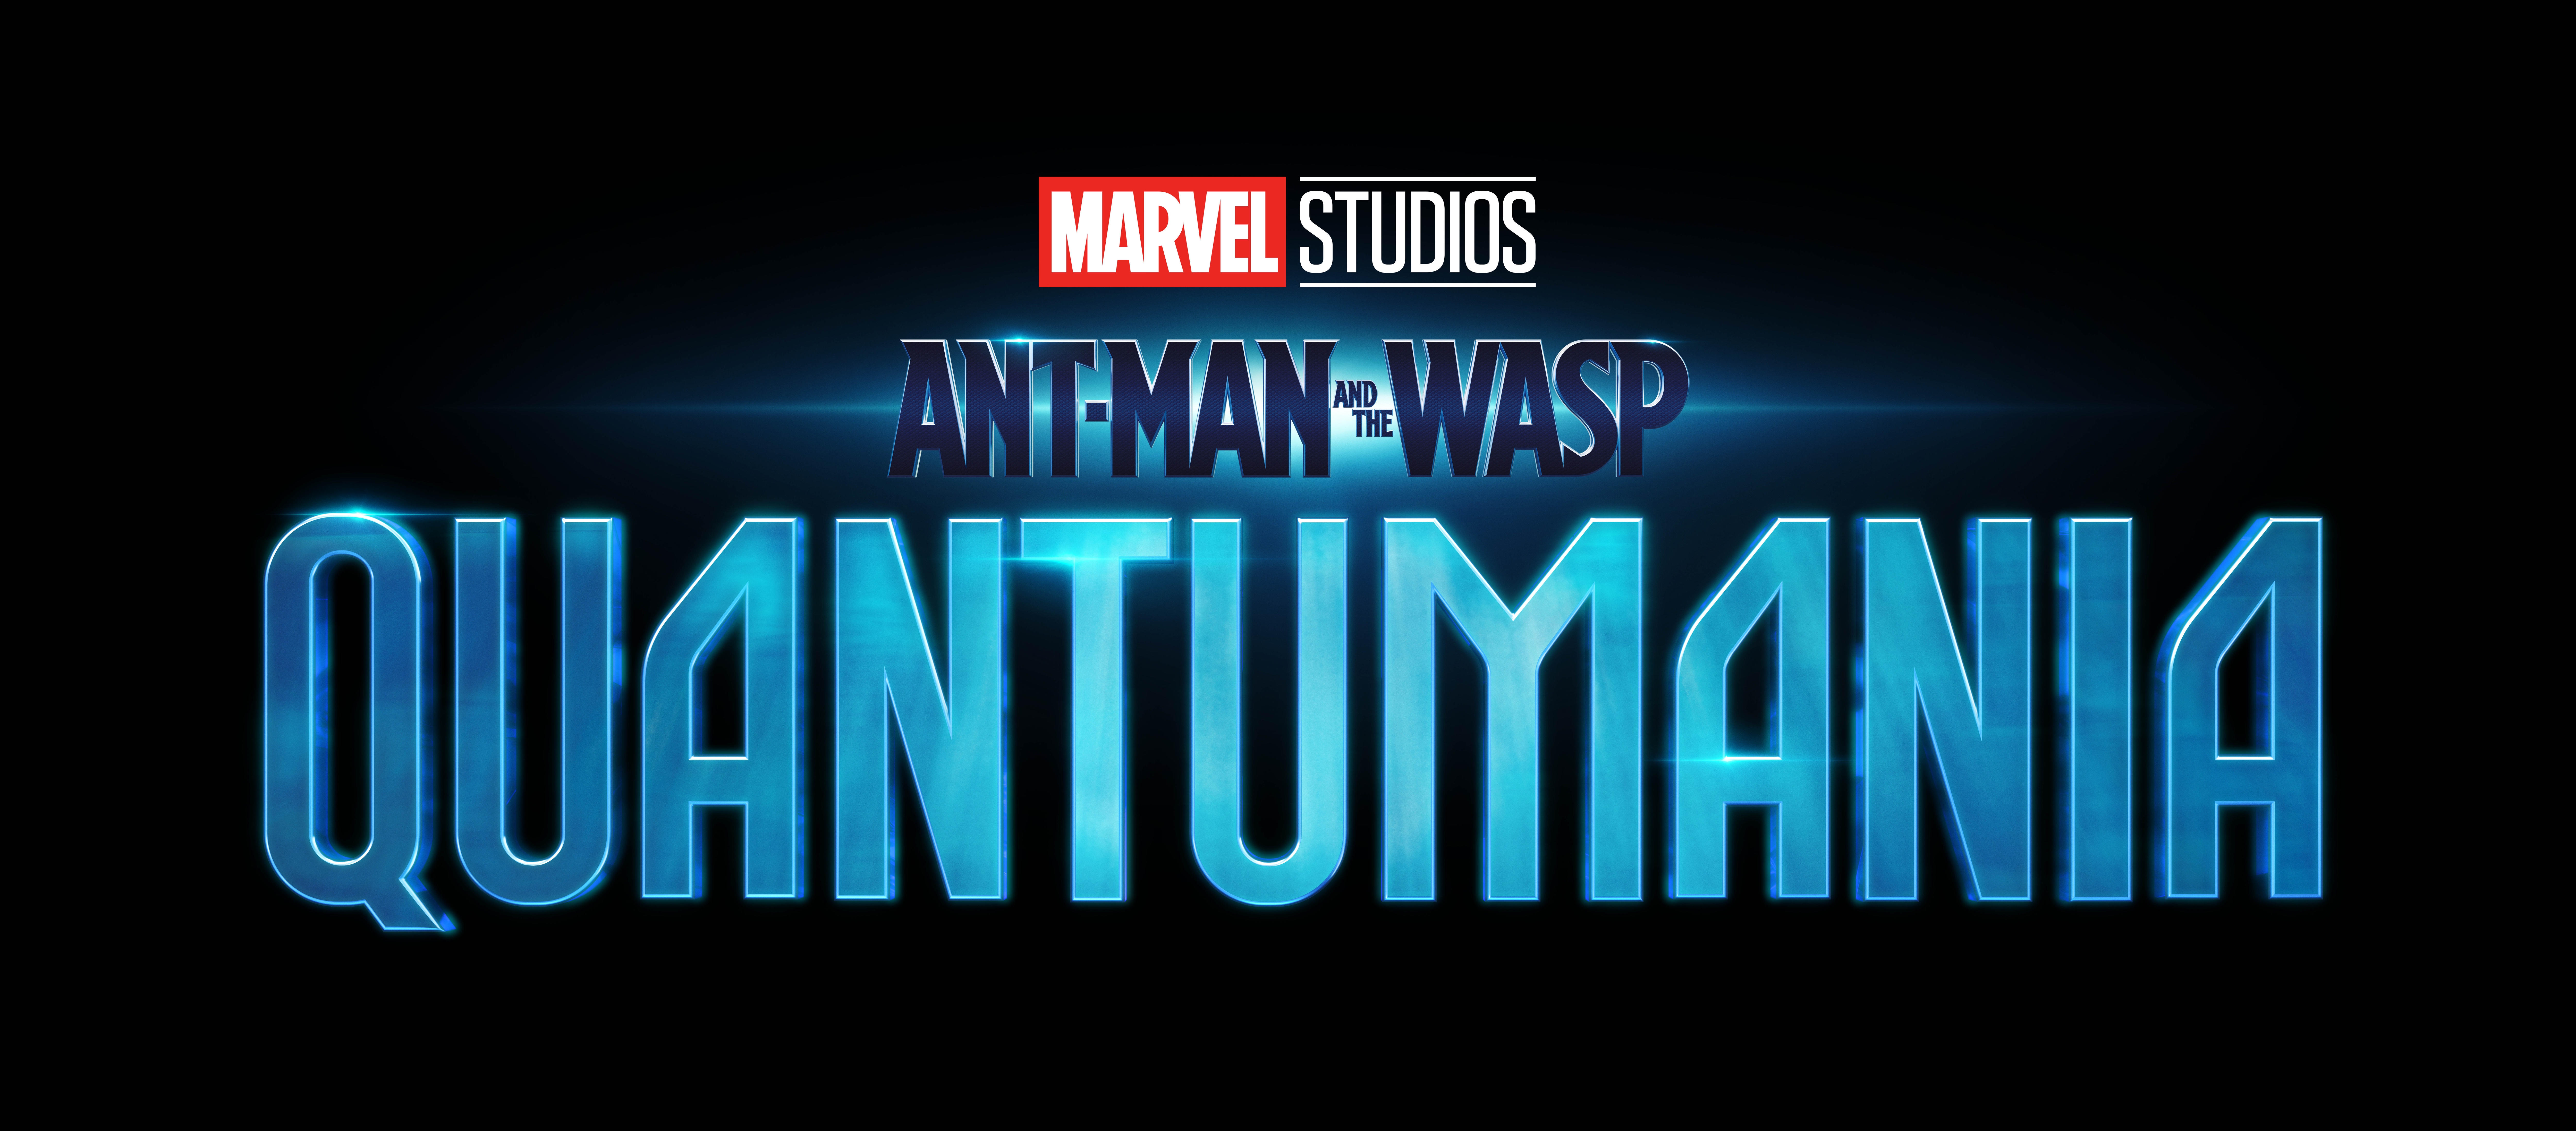 We knew this would be coming very soon and now Ant-Man and the Wasp: Quantumania gets a Disney+ release date.